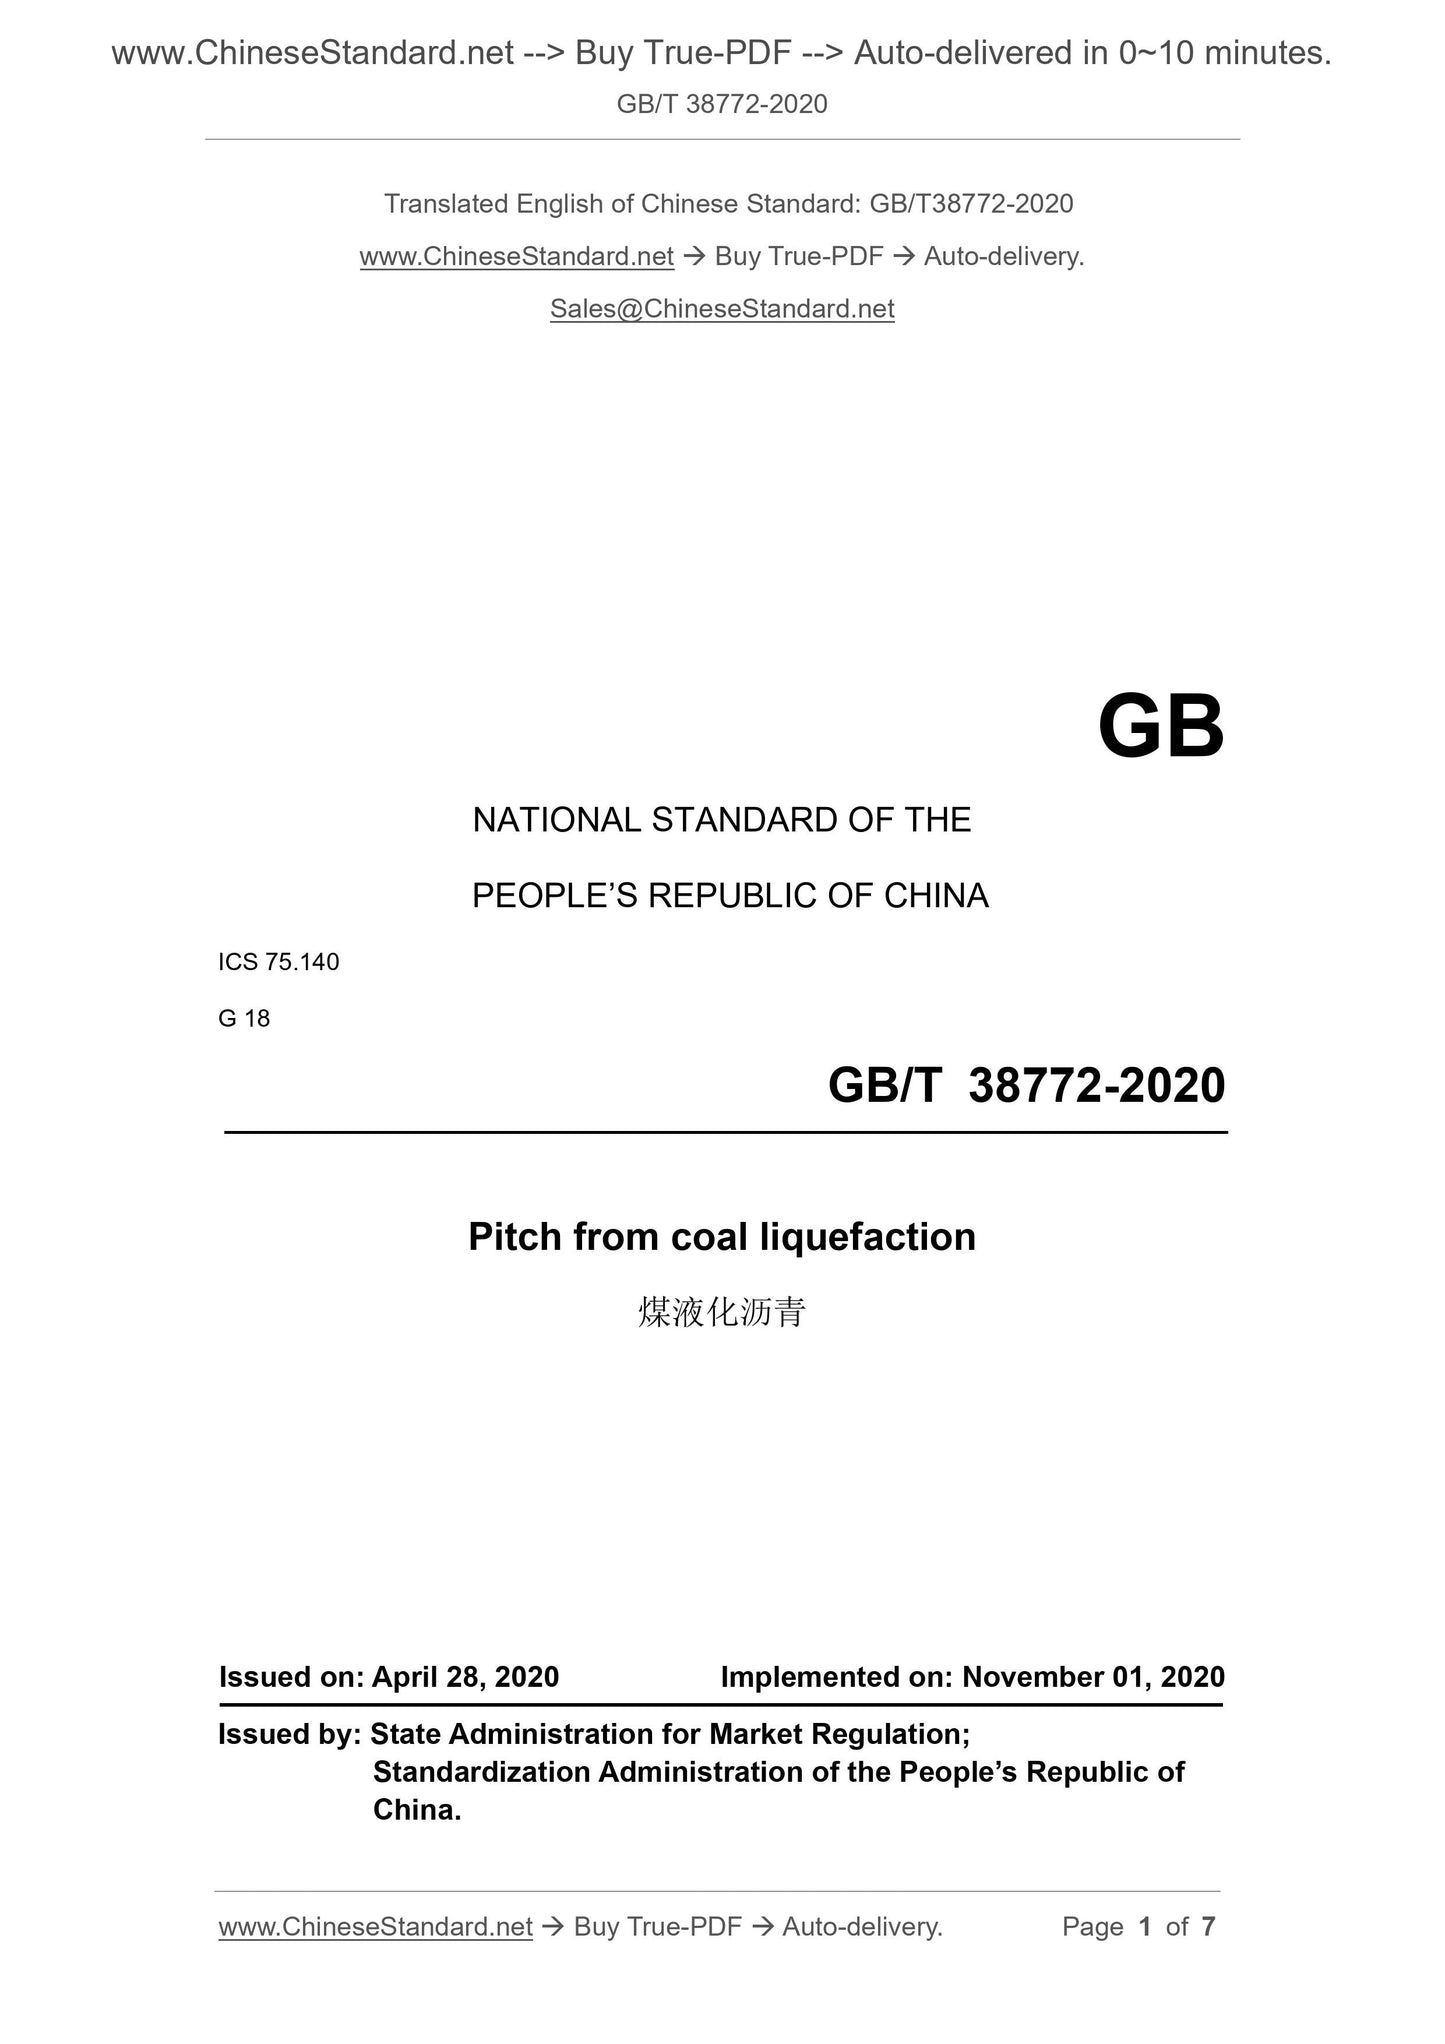 GB/T 38772-2020 Page 1